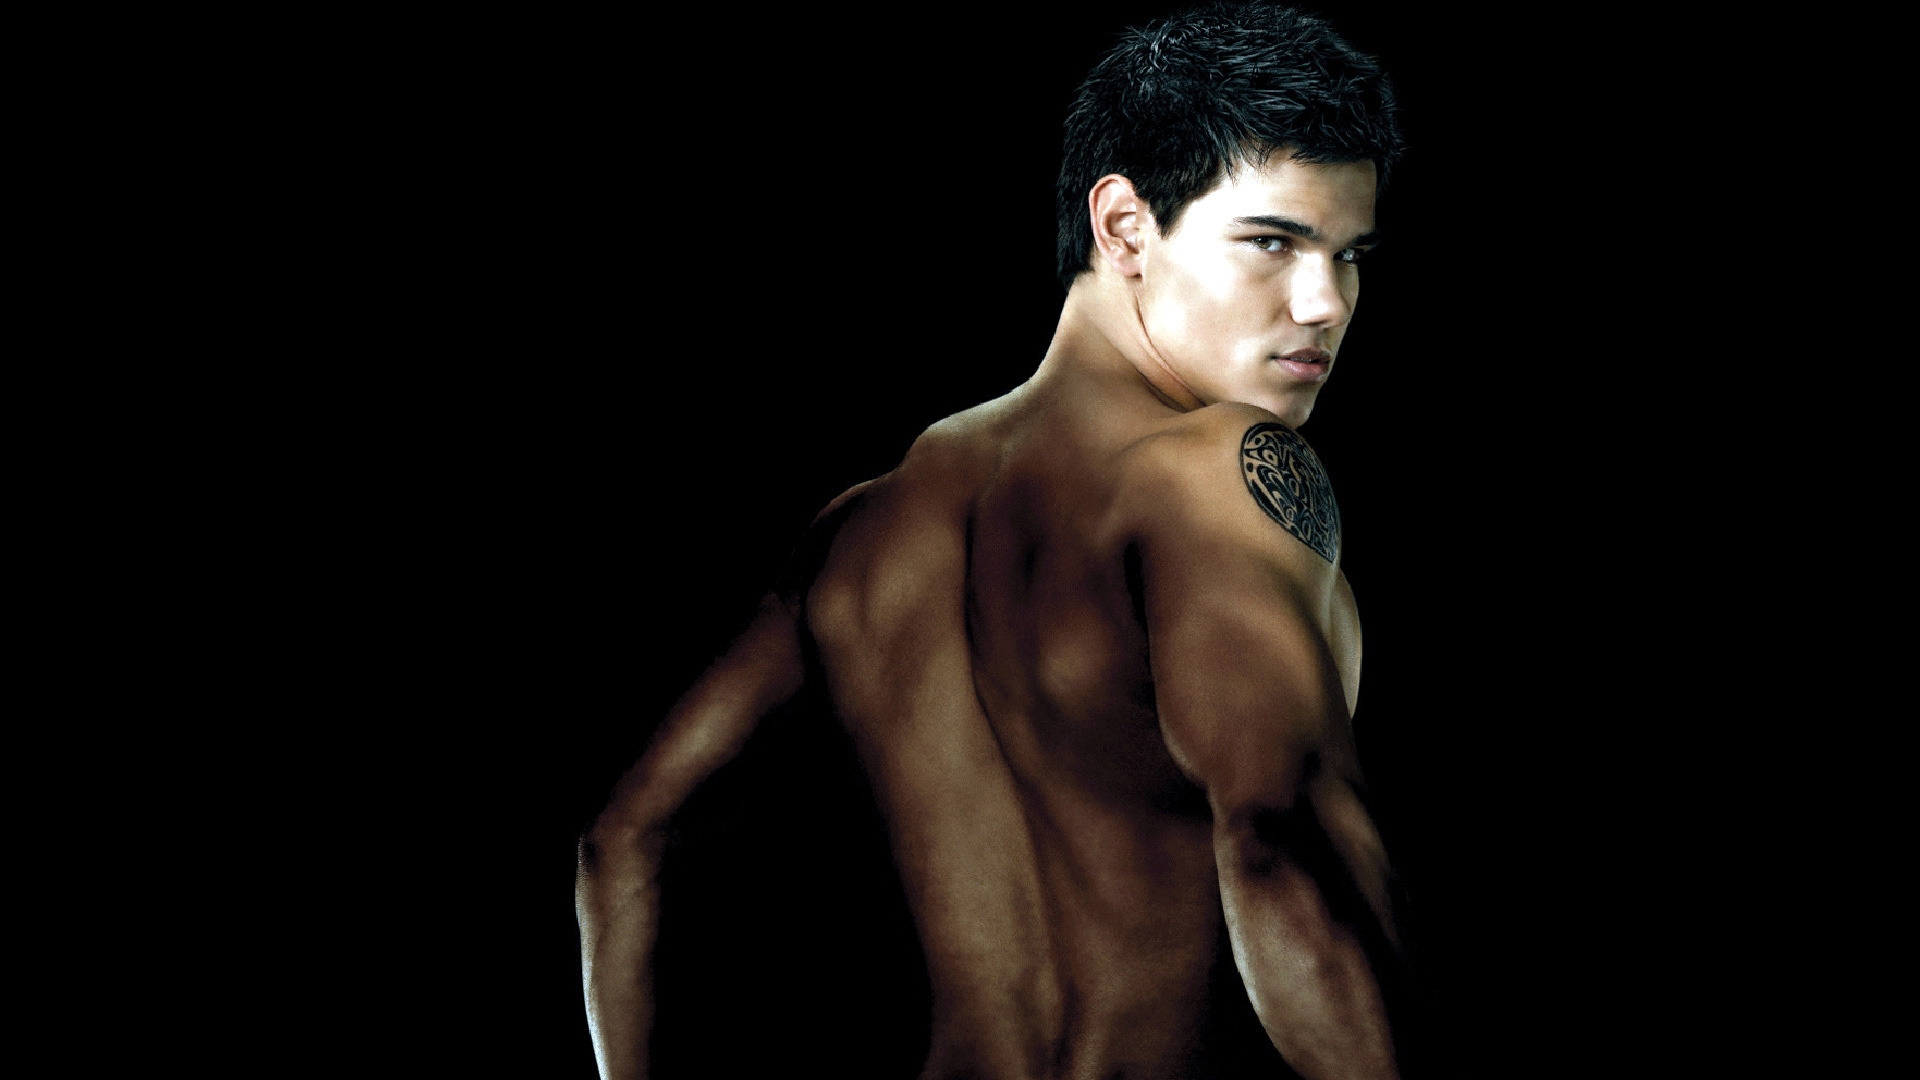 Taylor Lautner Sexy for 1920 x 1080 HDTV 1080p resolution